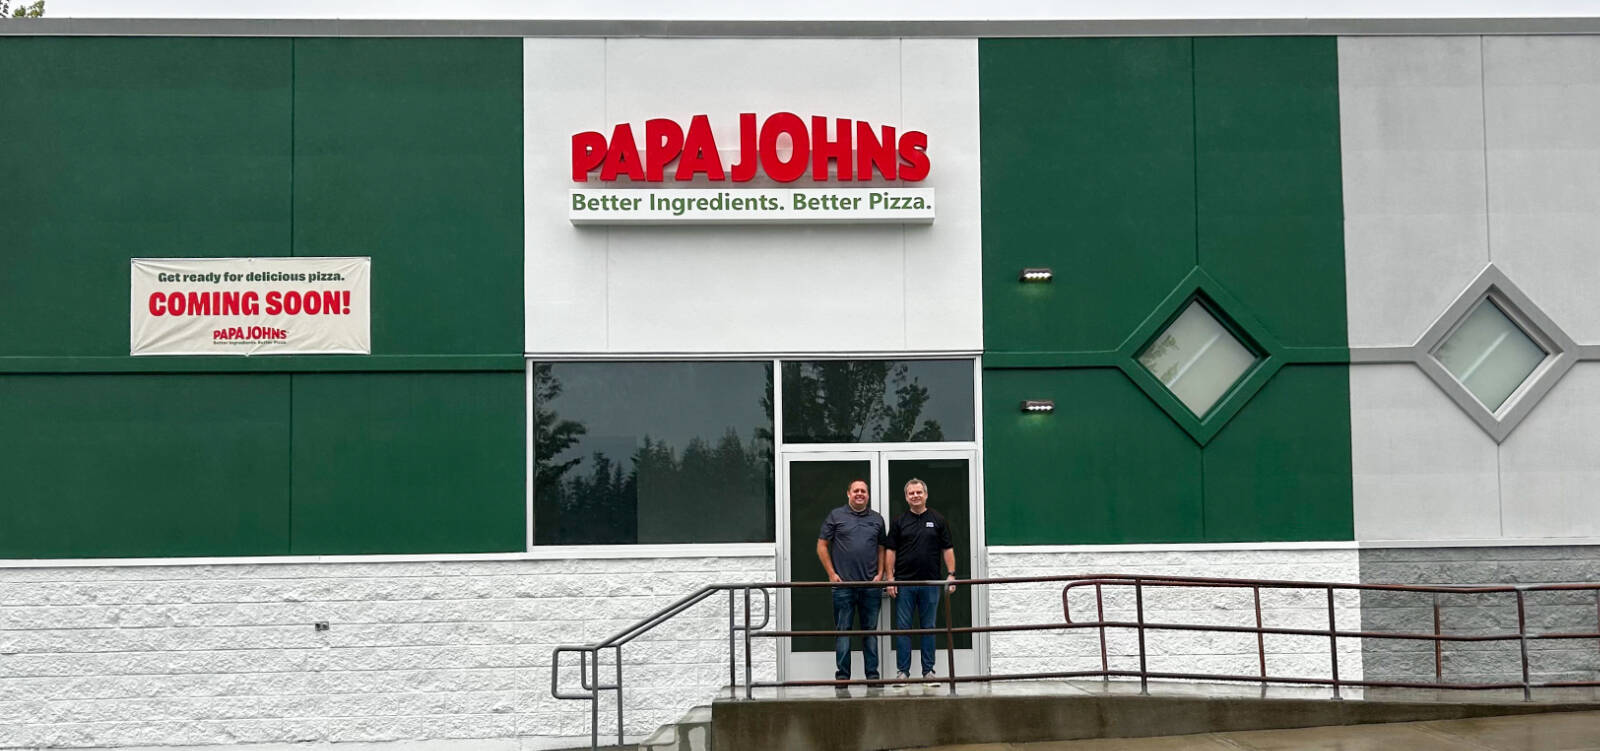 Franchise Owners Jesse Smith, left, and Matt Edwards, right, at the new Papa Johns, opening soon in Bonney Lake. Photo courtesy Papa Johns